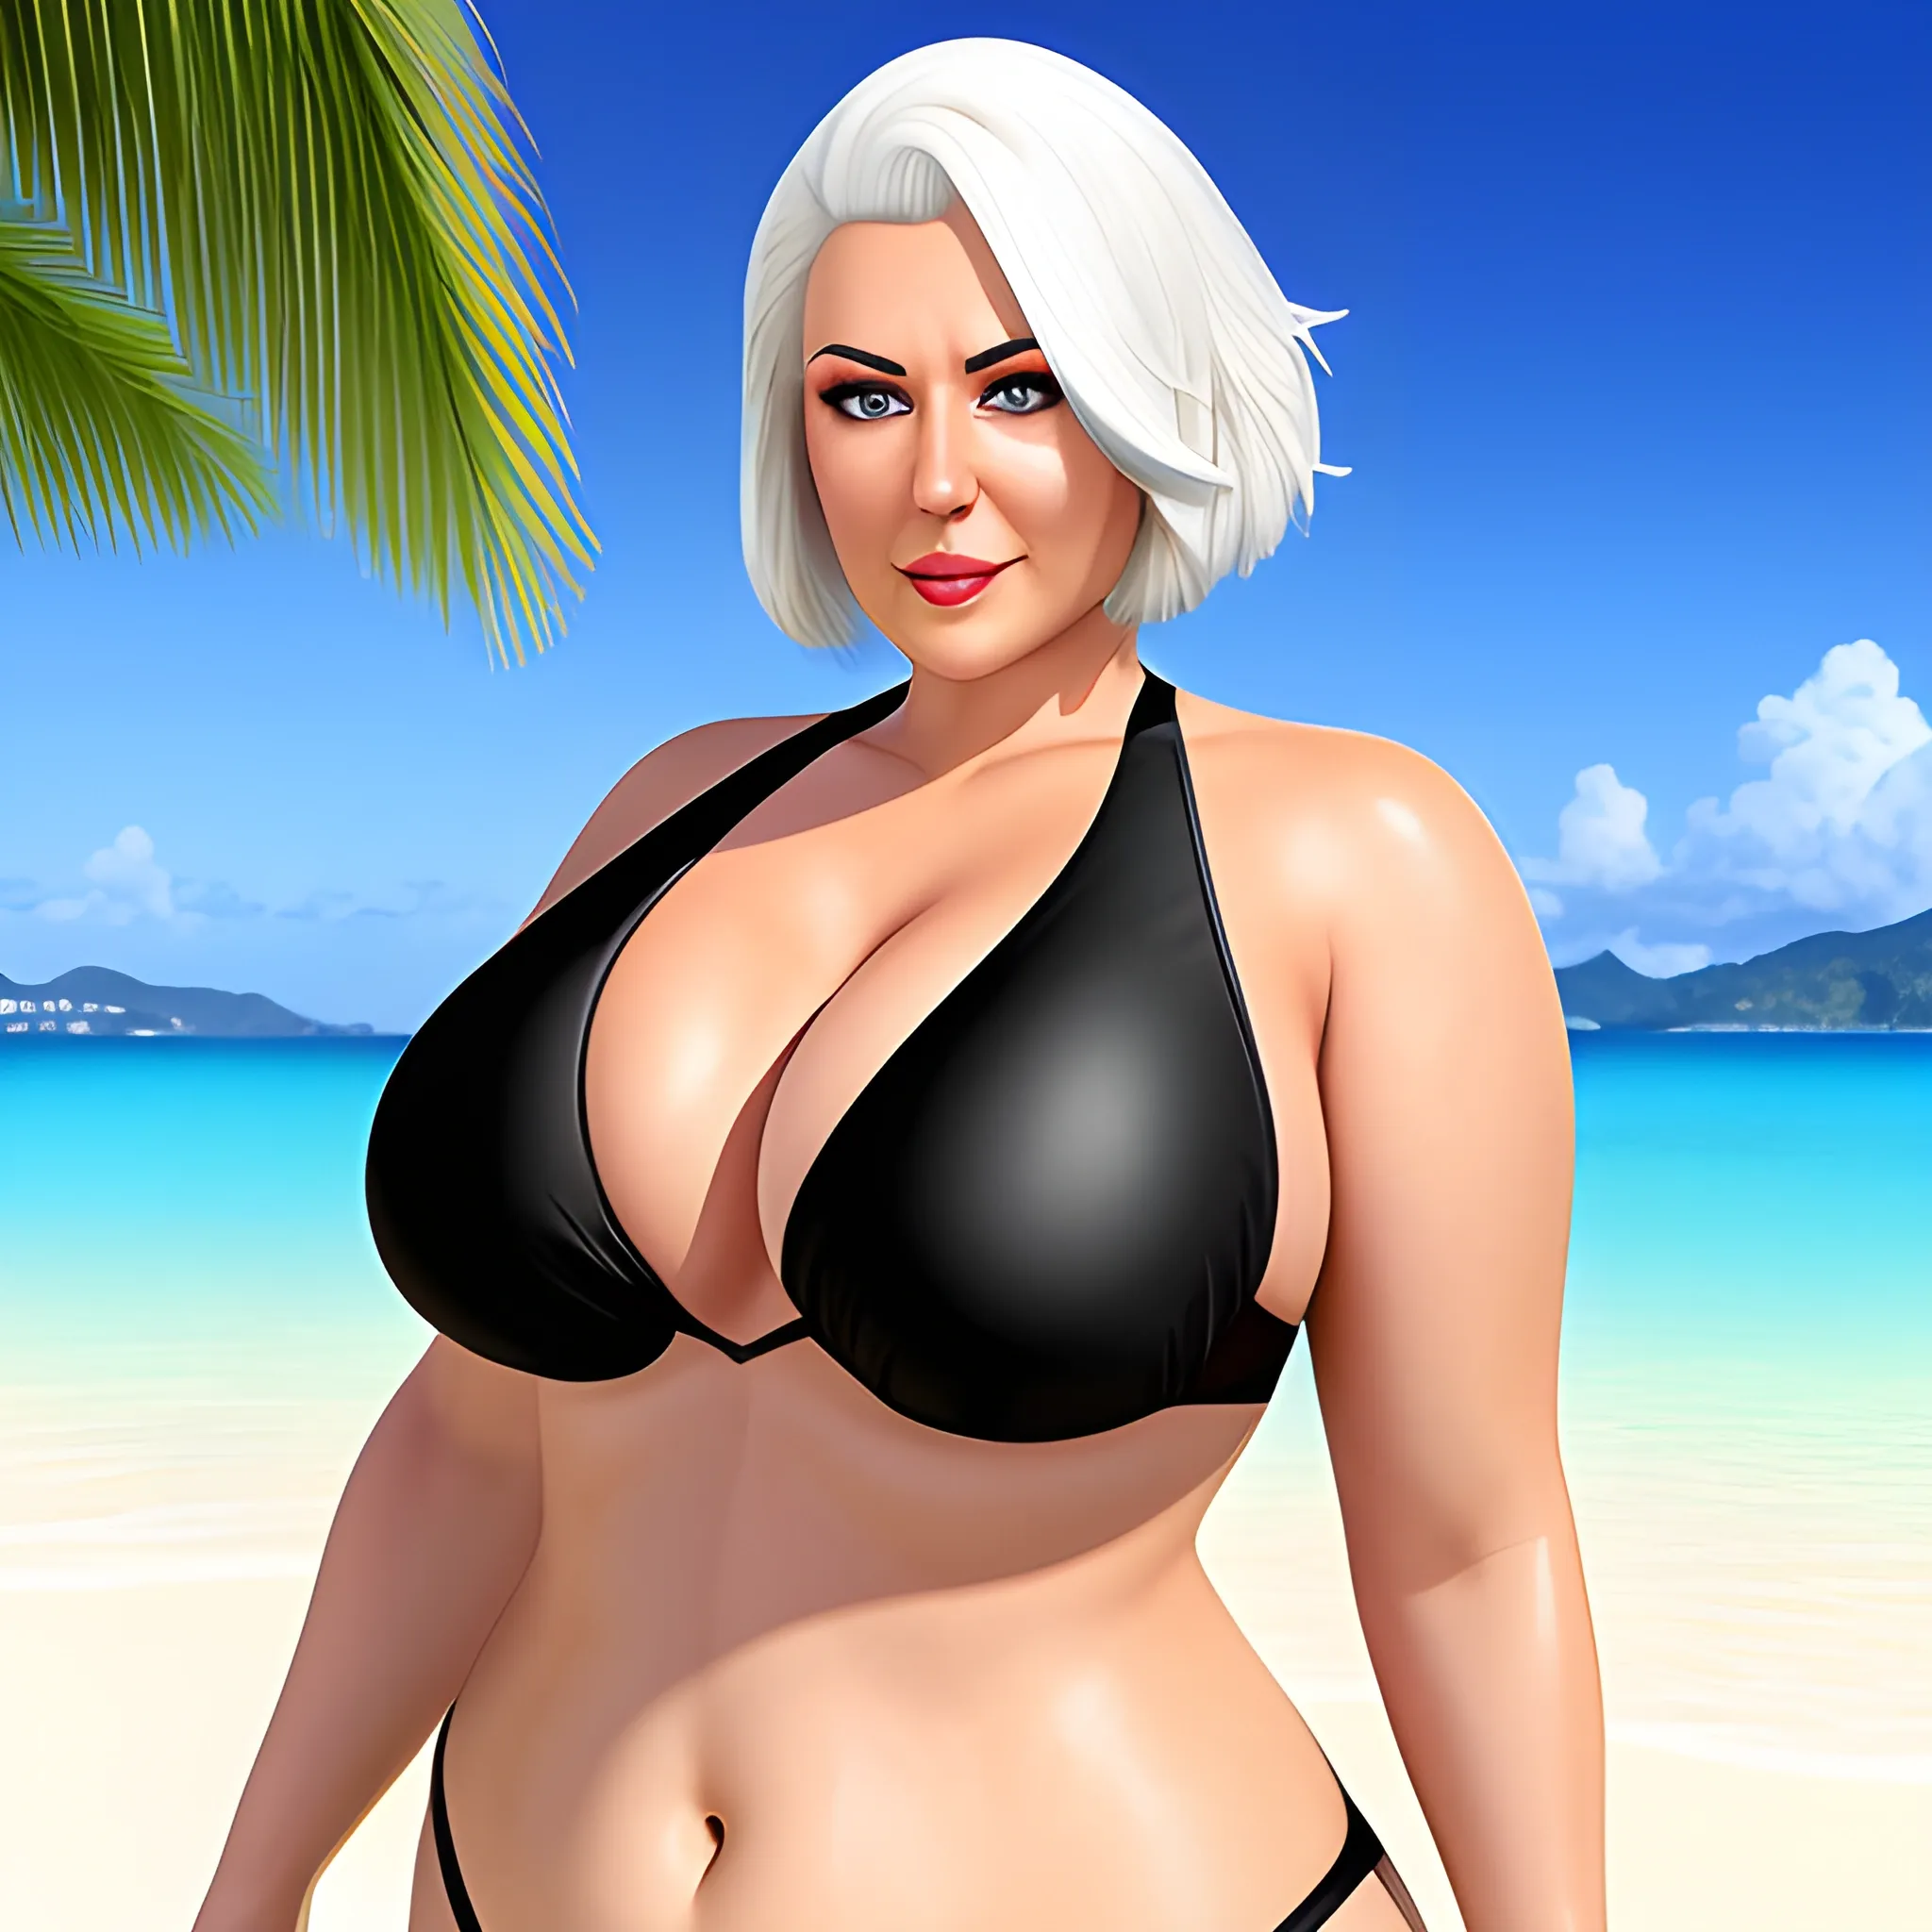 create a photorealistic image of a slightly chubby young woman with white hair and blue eyes, she is wearing black swimwear on a tropical beach, chest visible, high details, full body